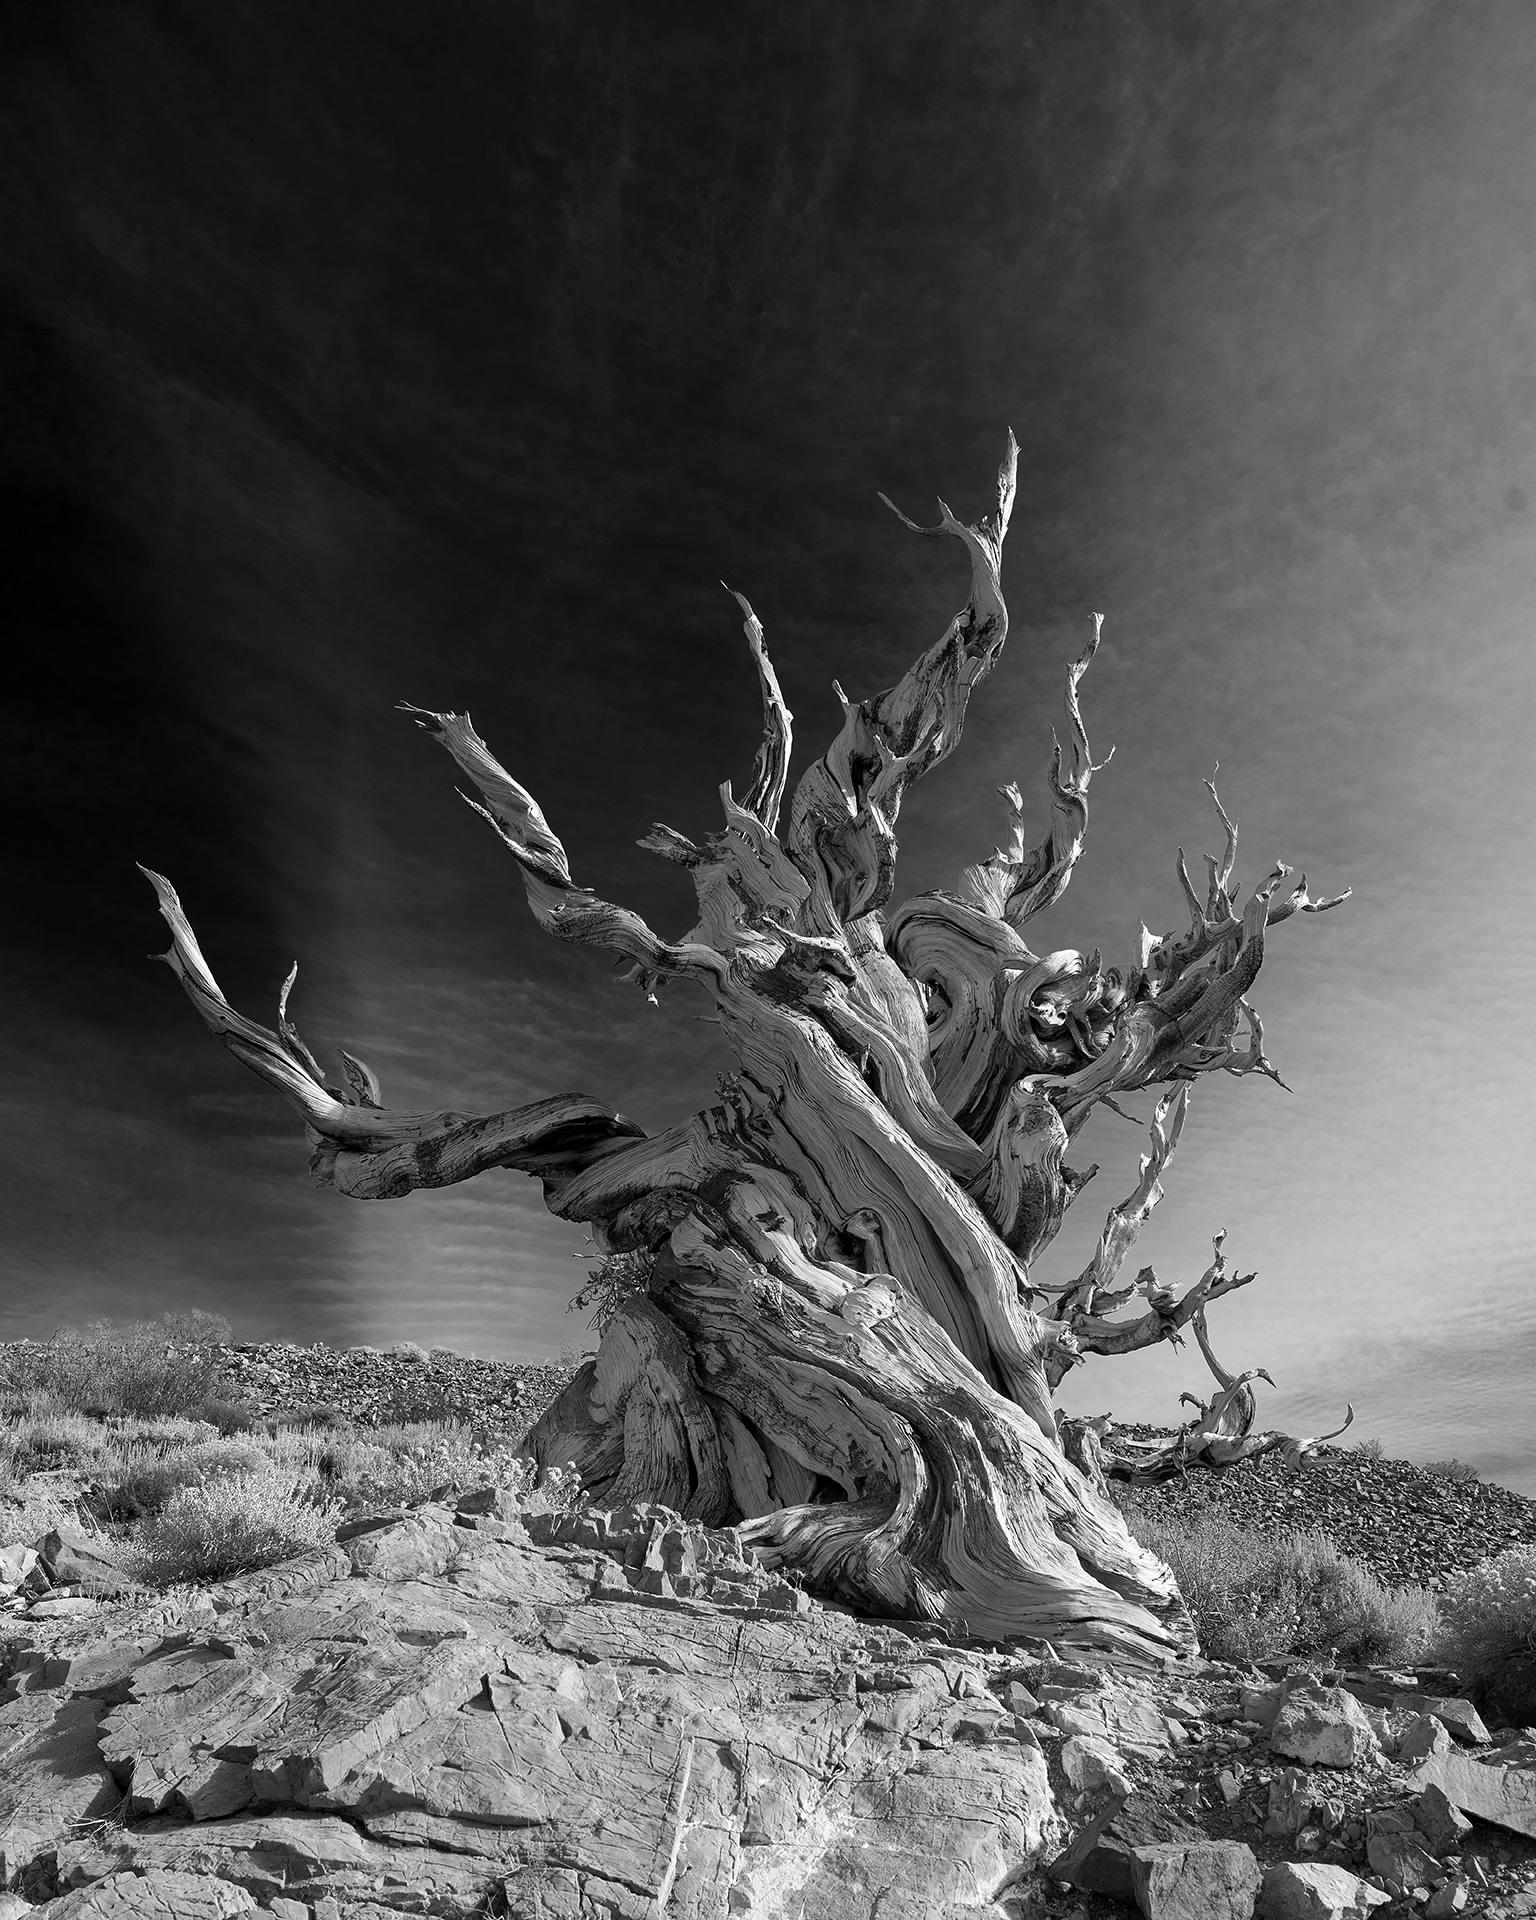 Tree Study V - large format b/w photograph of lone ancient tree in landscape - Contemporary Photograph by Frank Schott